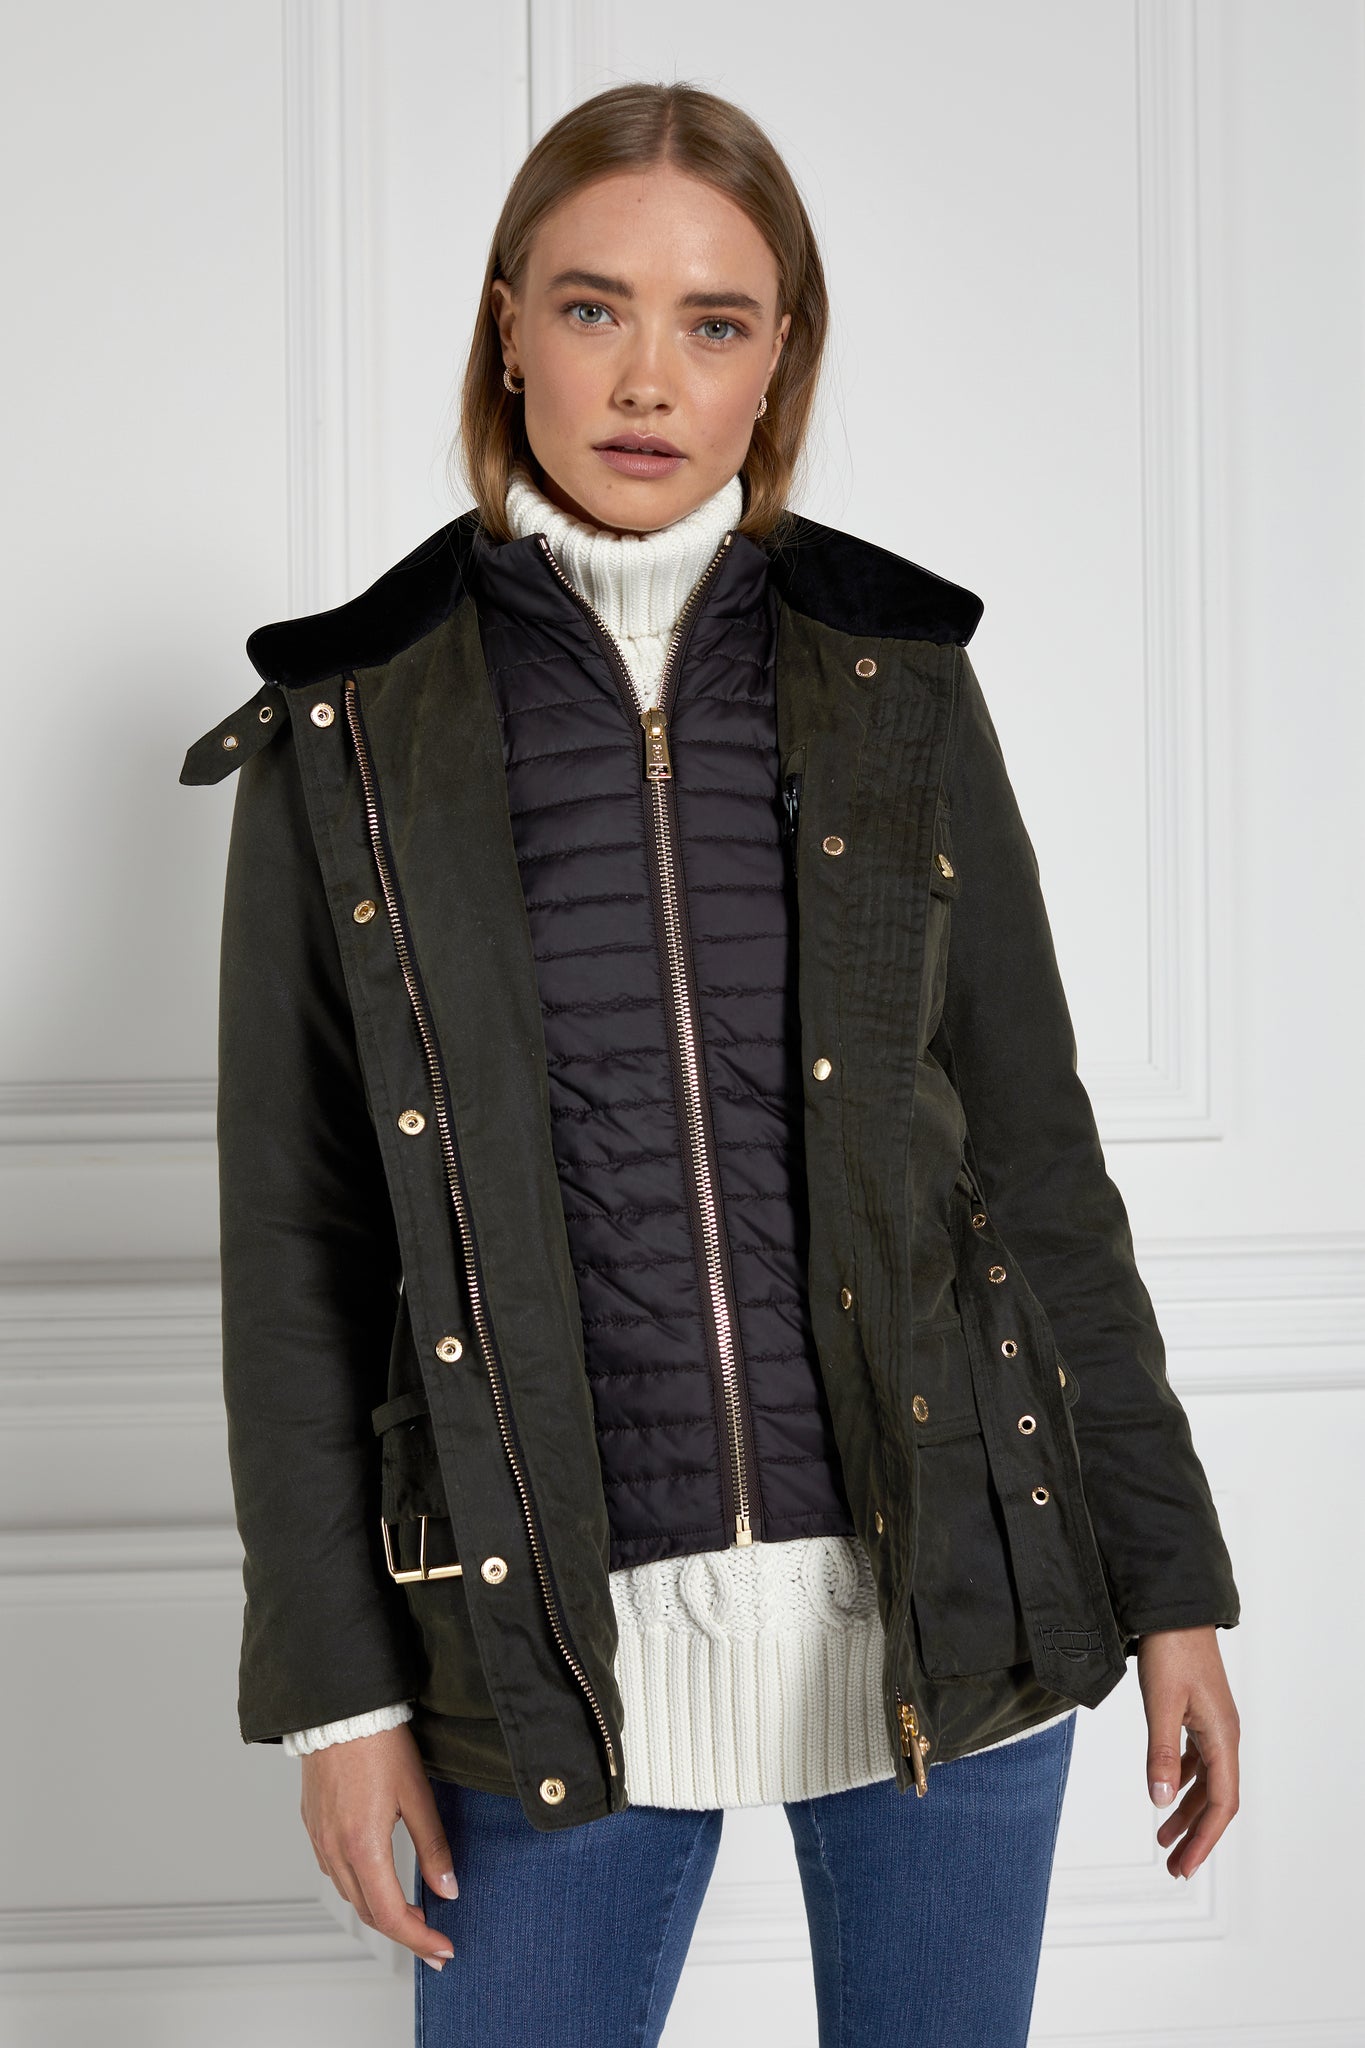 womens coated wax jacket in dark olive green with four patch pockets belted waist and internal black gilet 